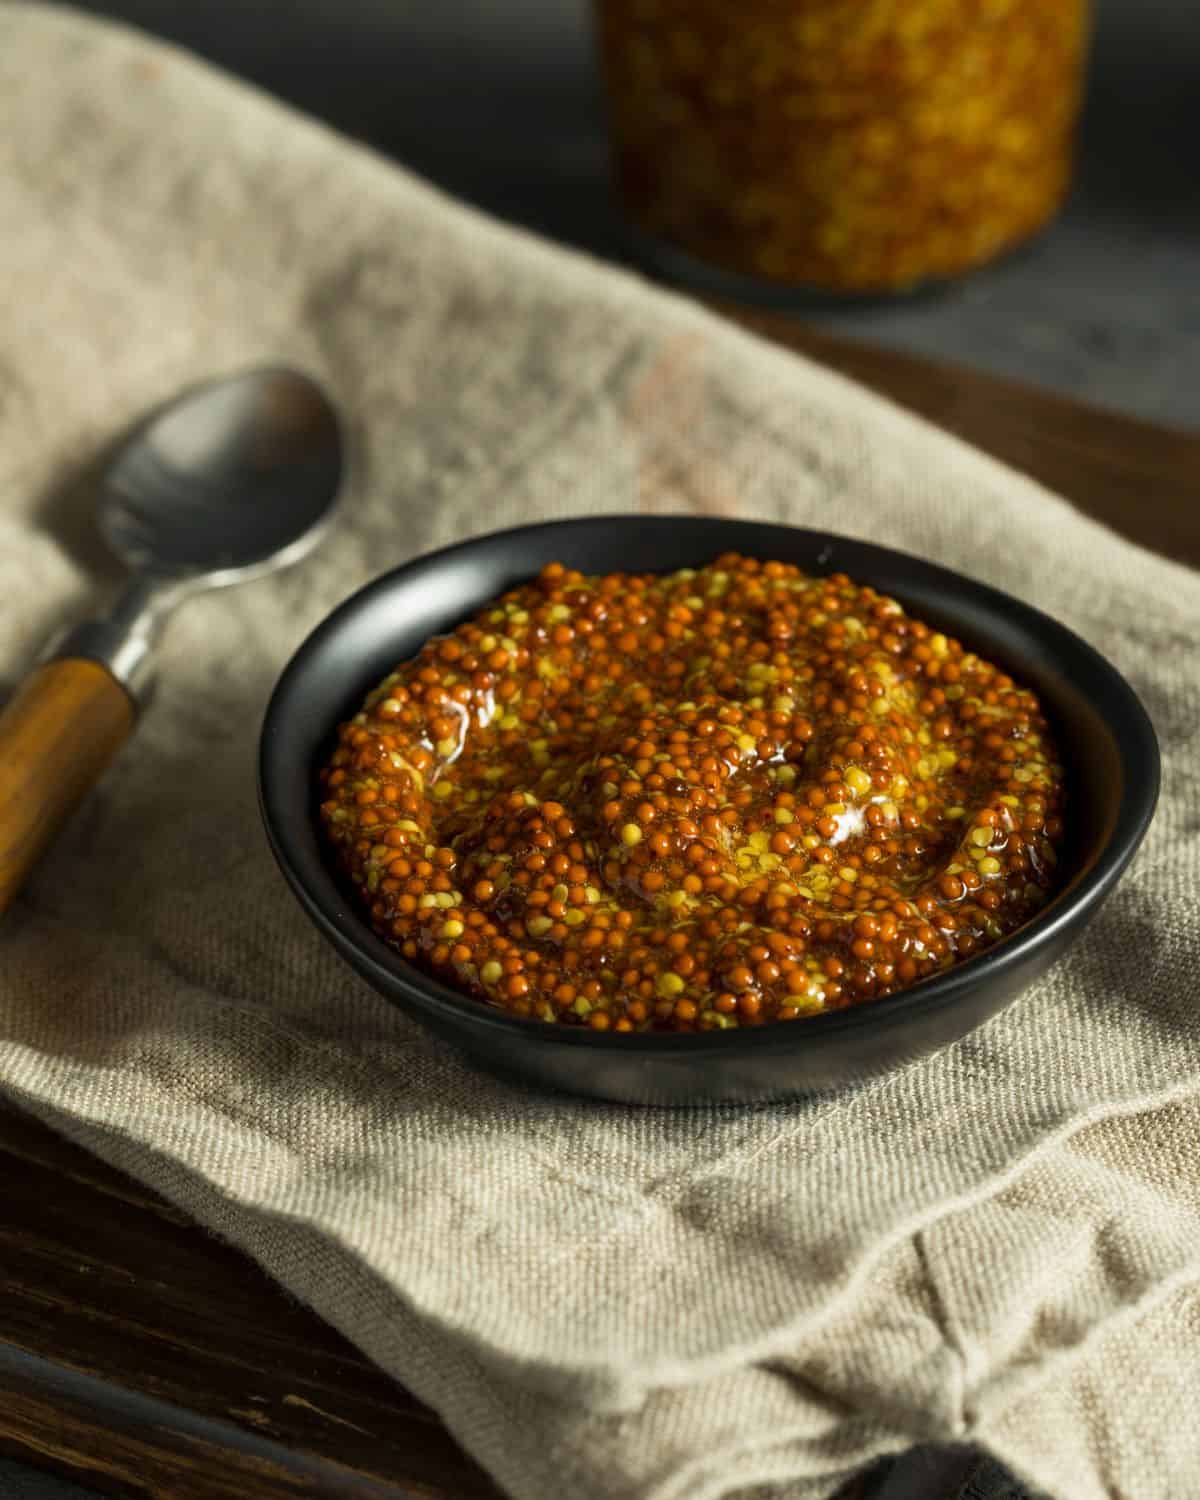 Wholegrain mustard in a bowl with a spoon next to it.